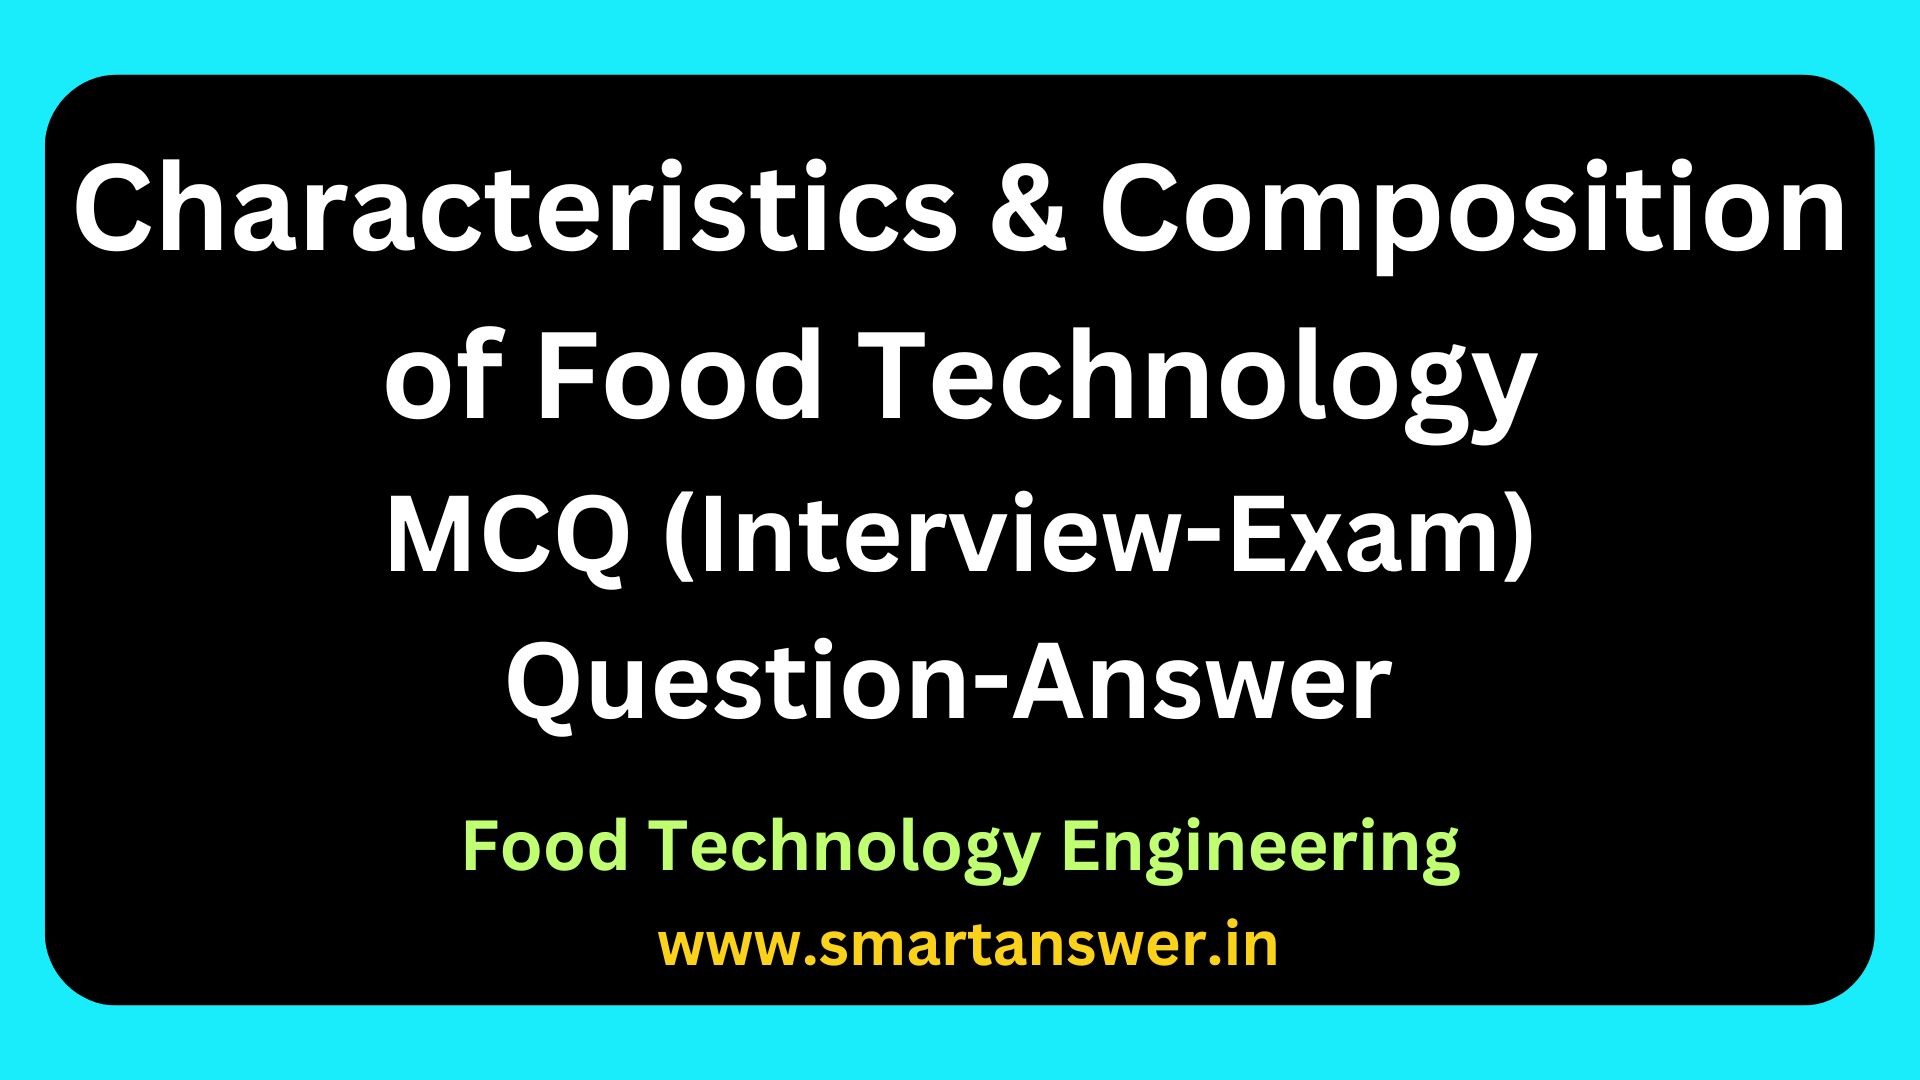 Food Technology Engineering MCQ (Interview-Exam) Question-Answer - Characteristics and Composition of Food